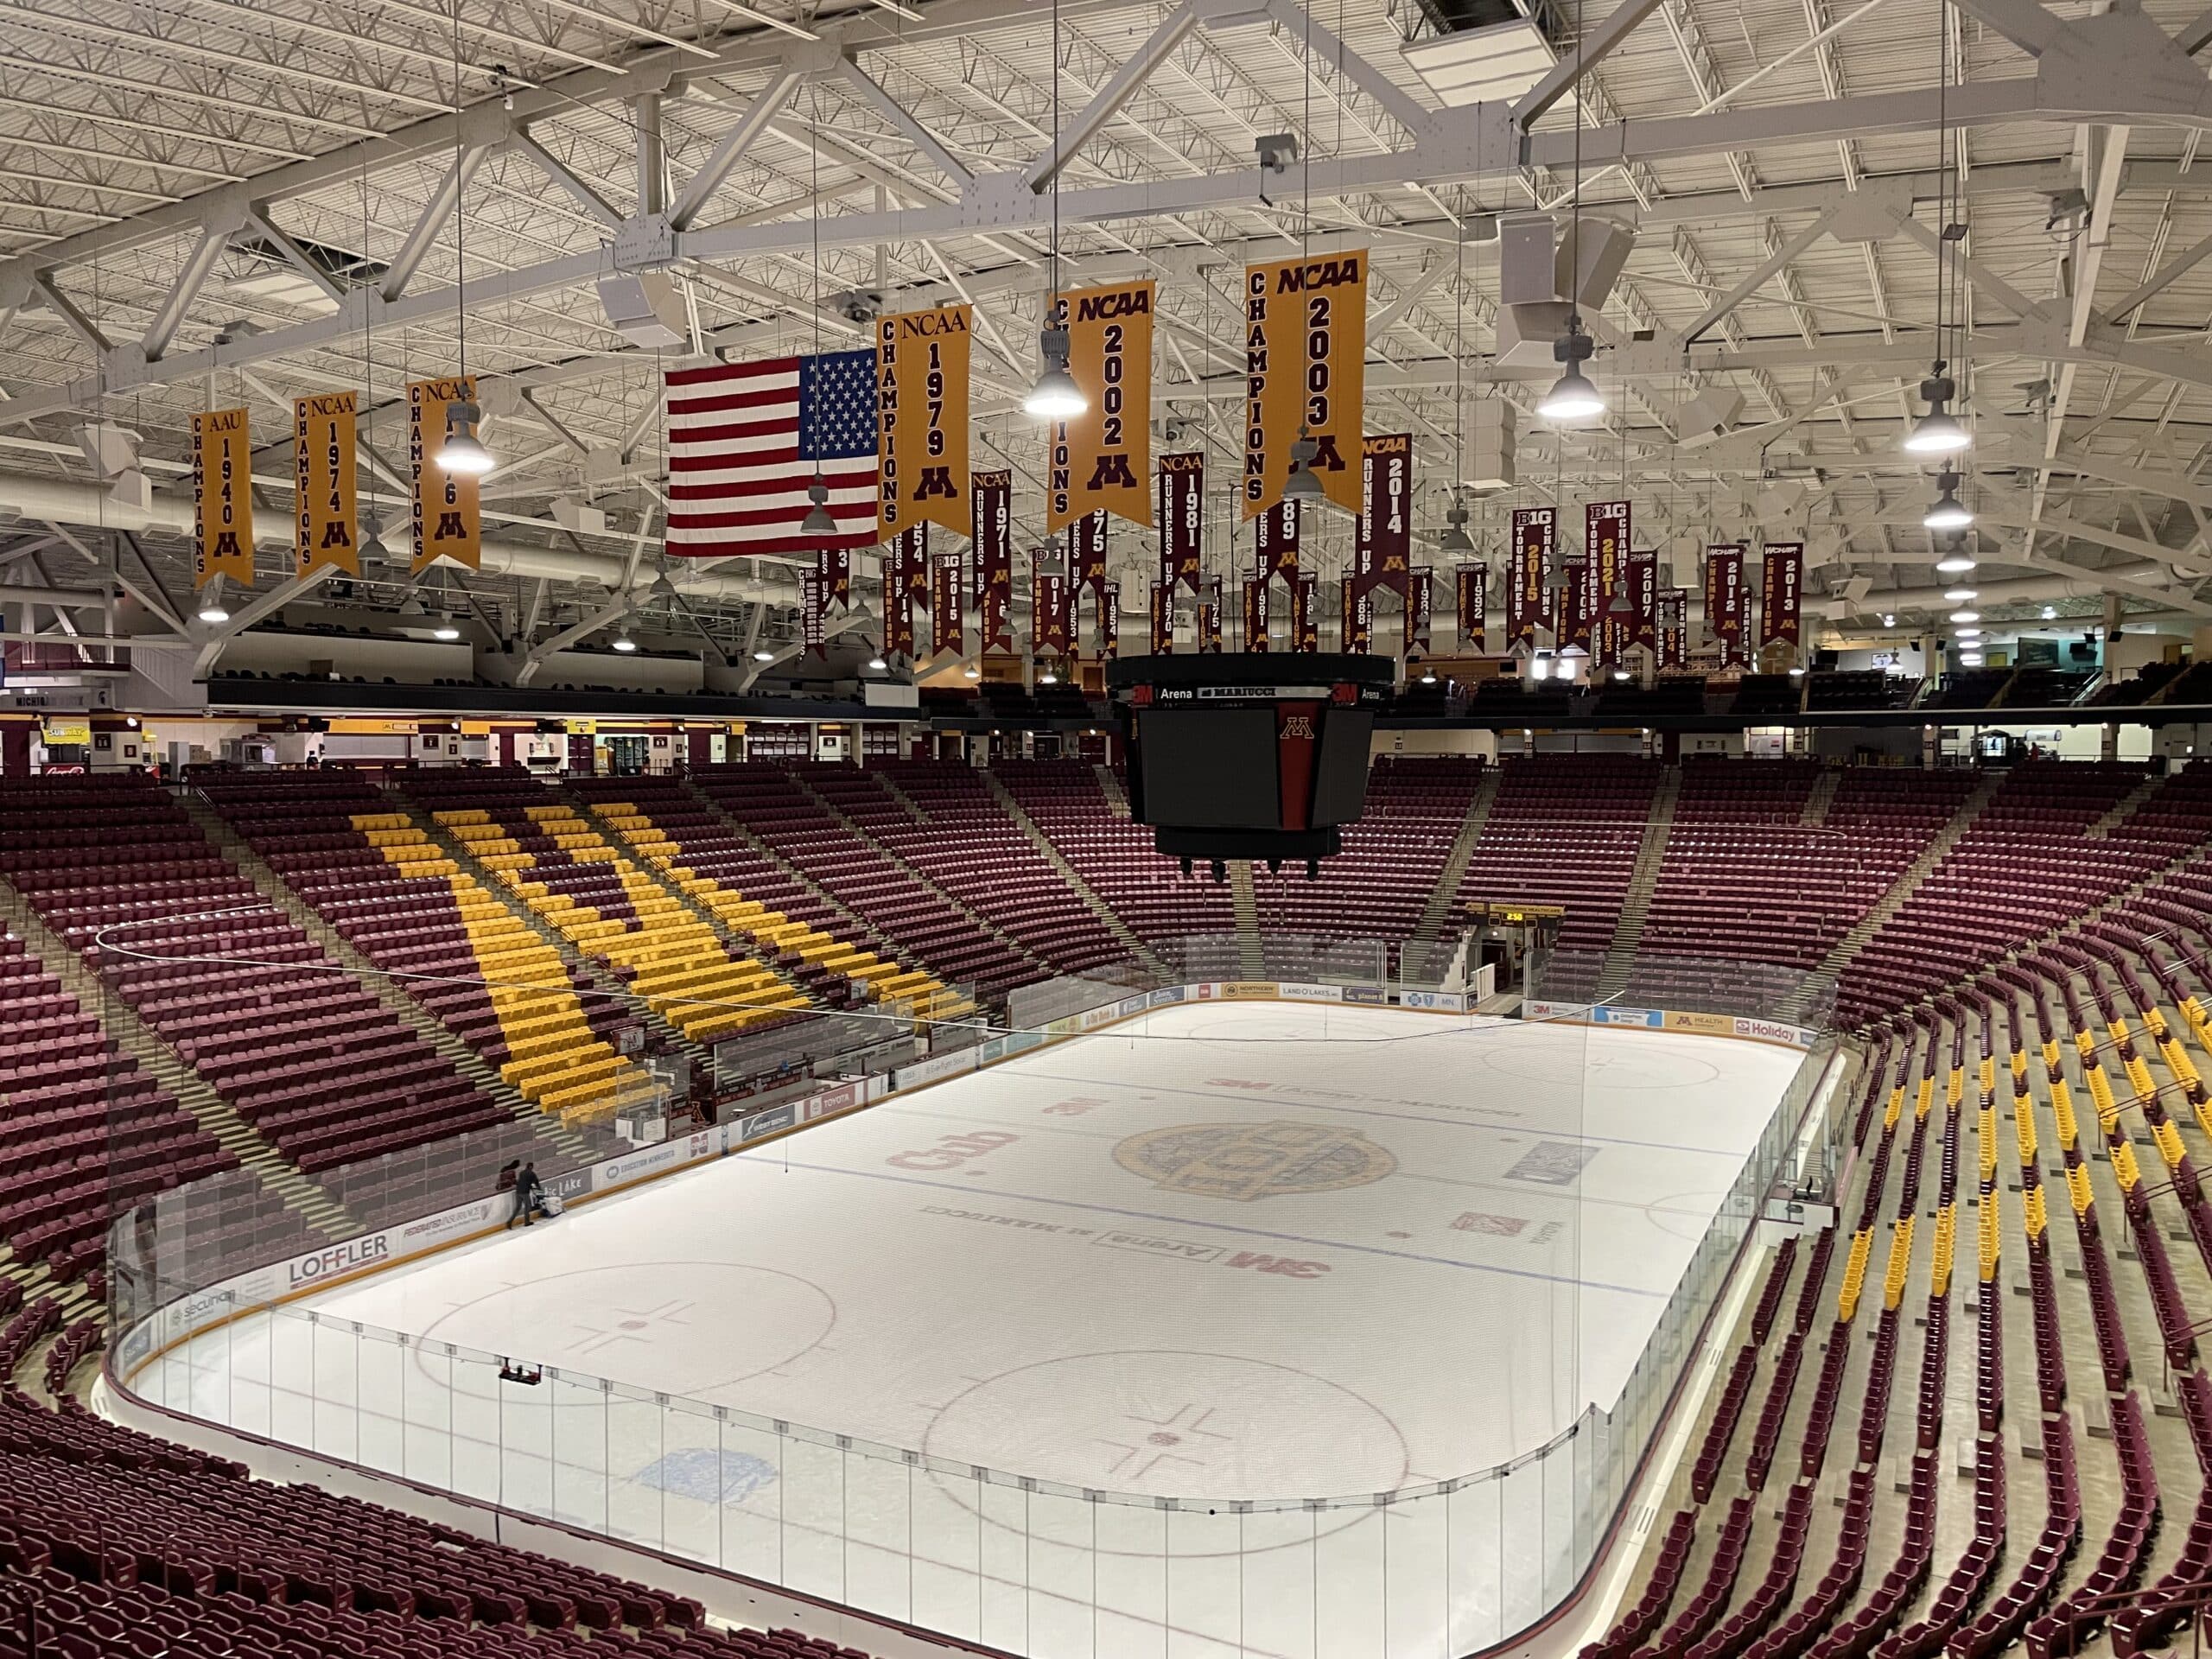 Once a trend in college hockey, Olympic-sized rinks are going away